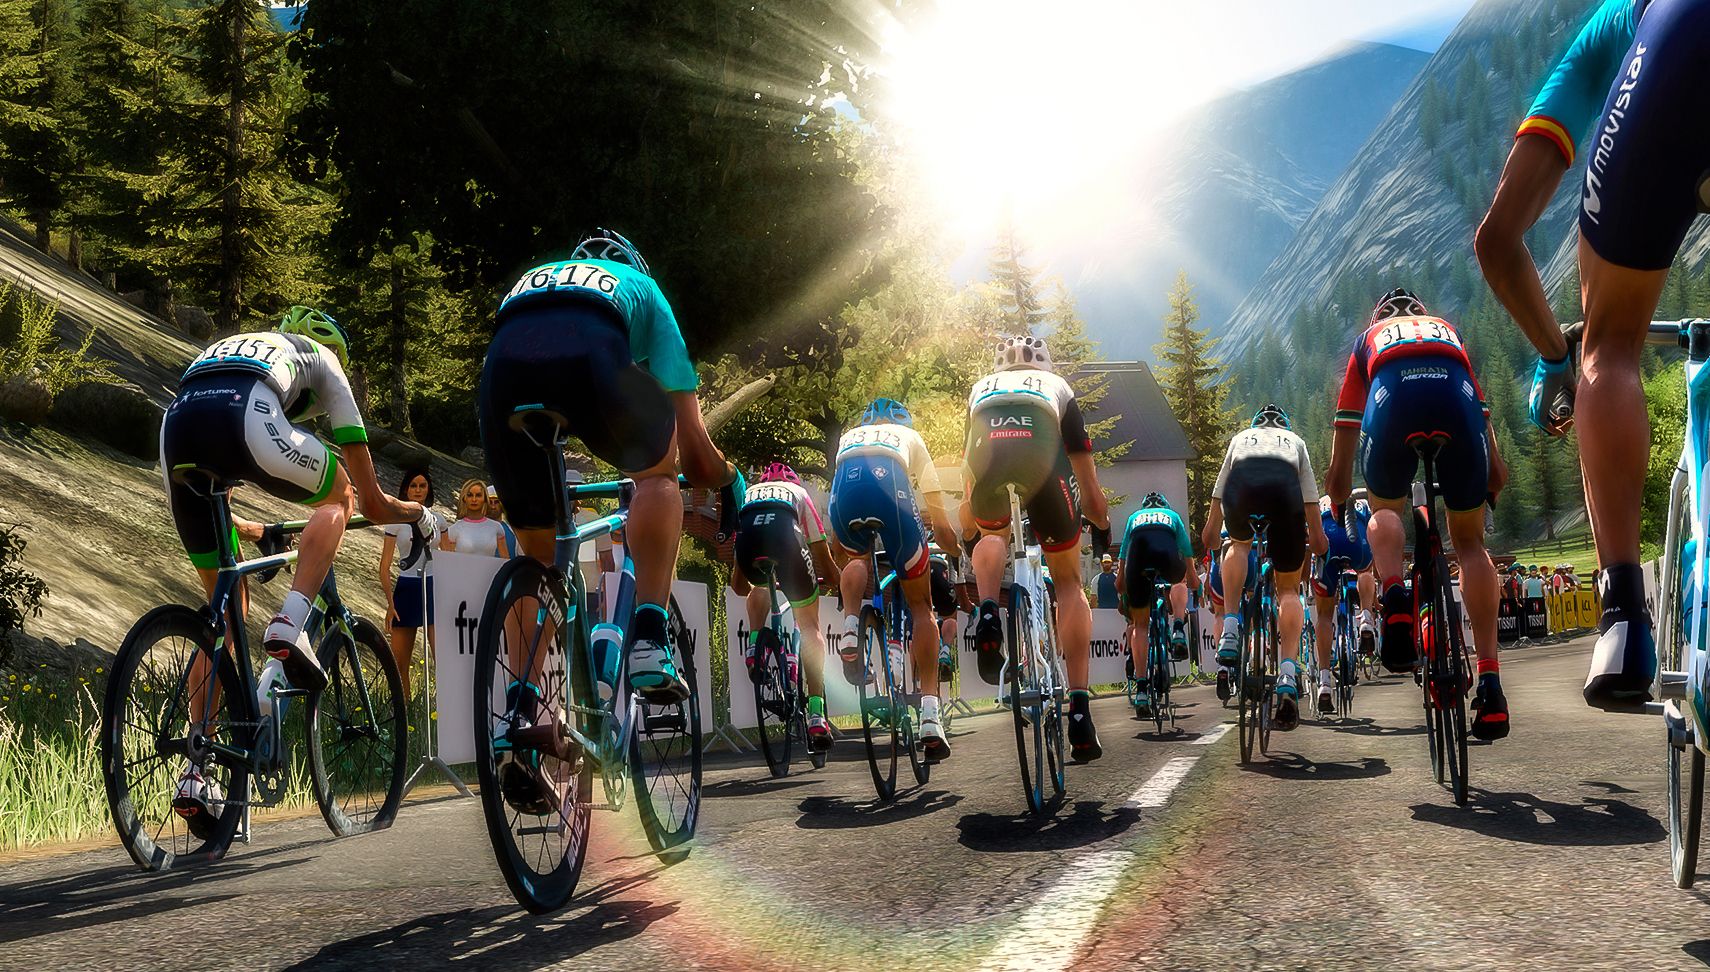 Pro Cycling Manager Guide